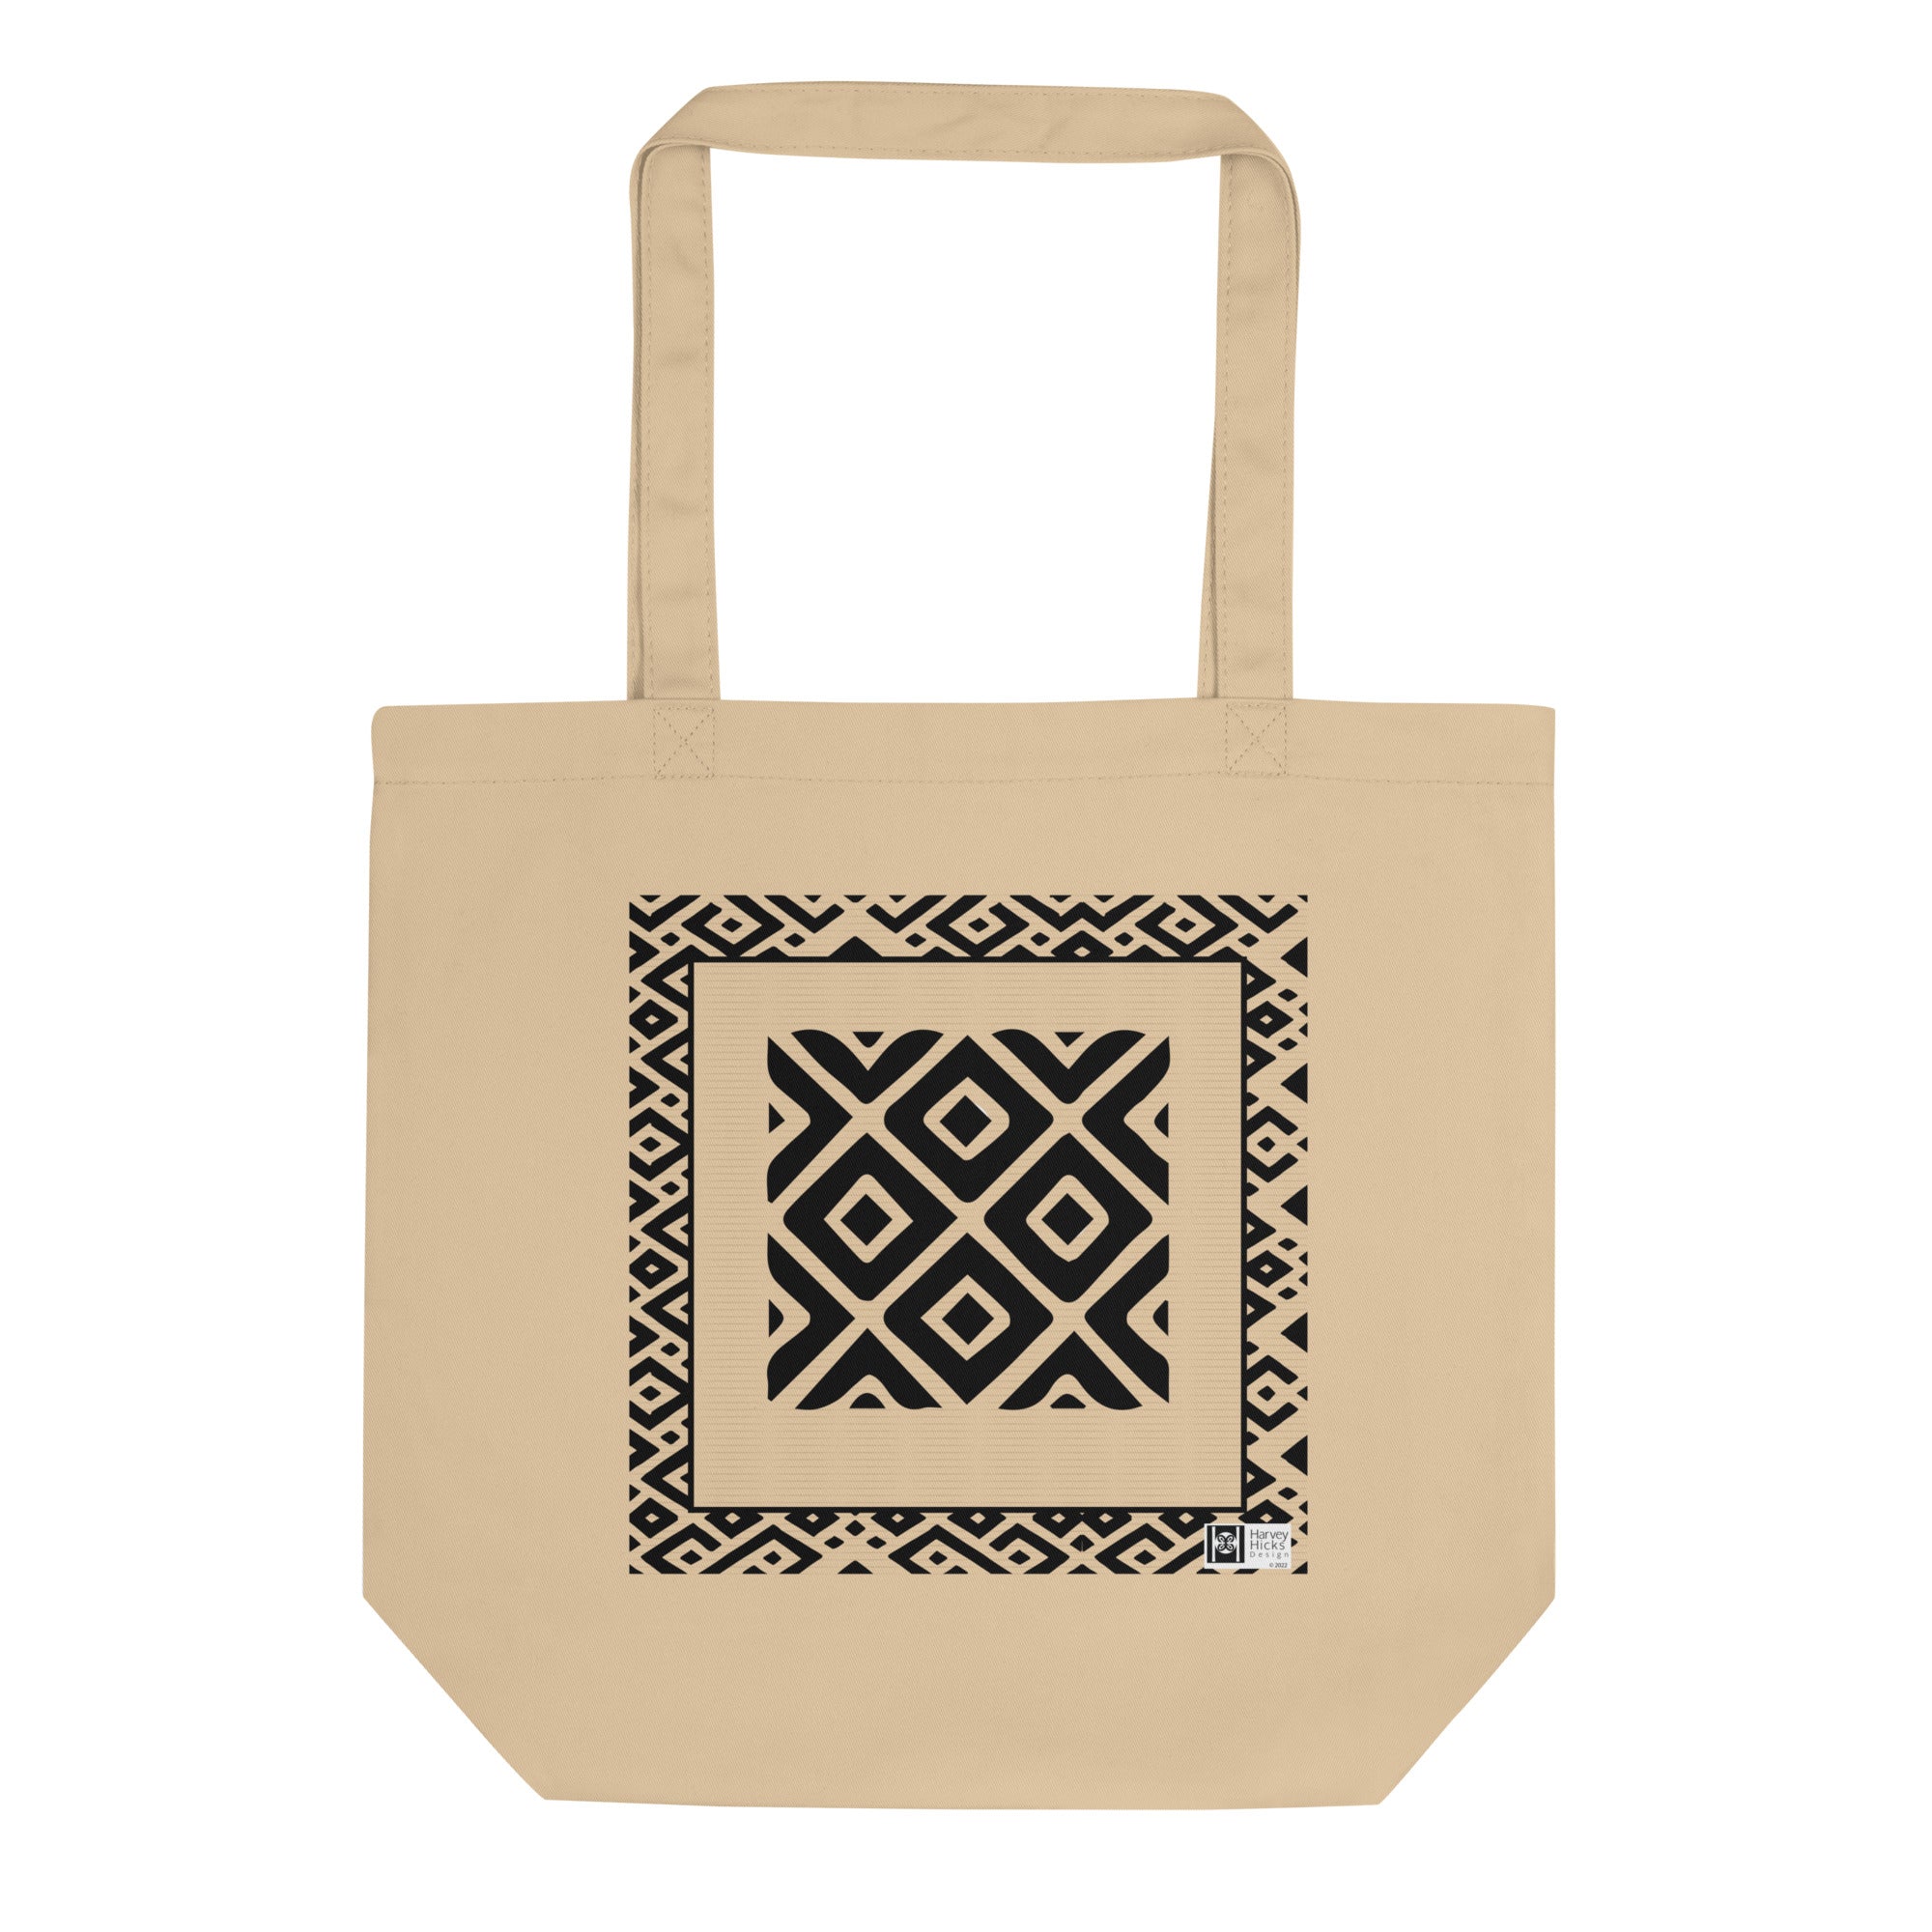 100% cotton Eco Tote Bag, featuring the Adinkra symbol for self-containment, NO TEXT